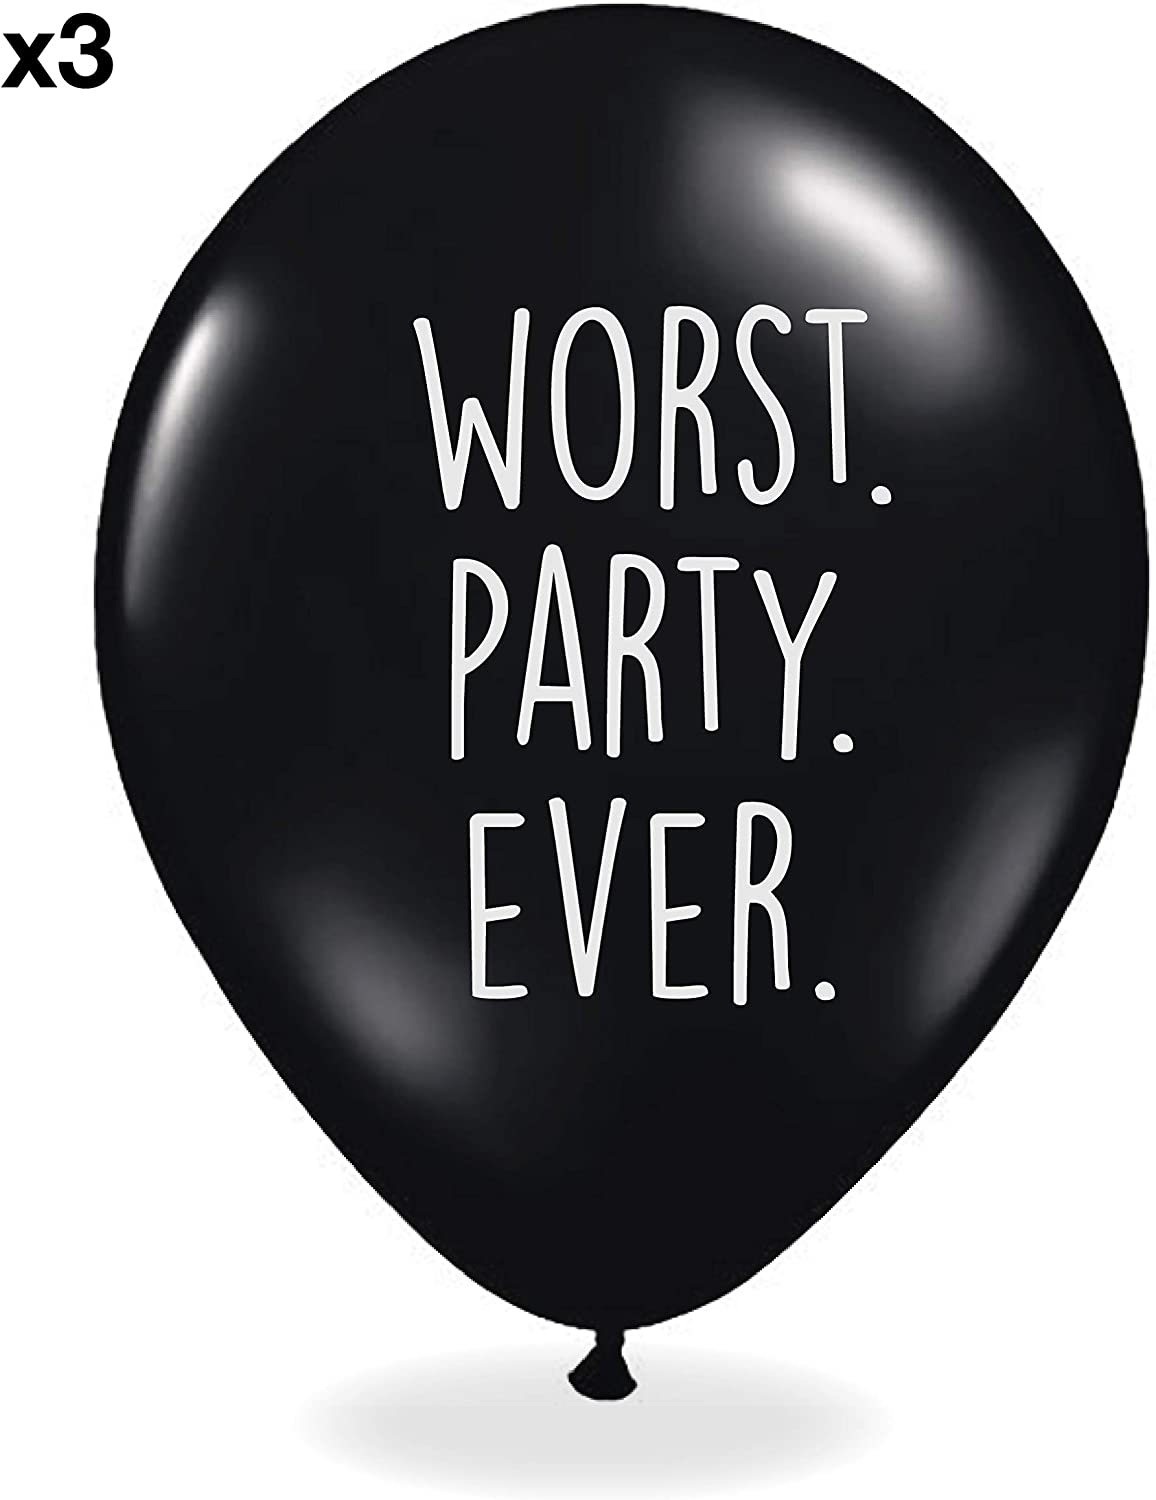 Abusive Balloons - oddgifts.com